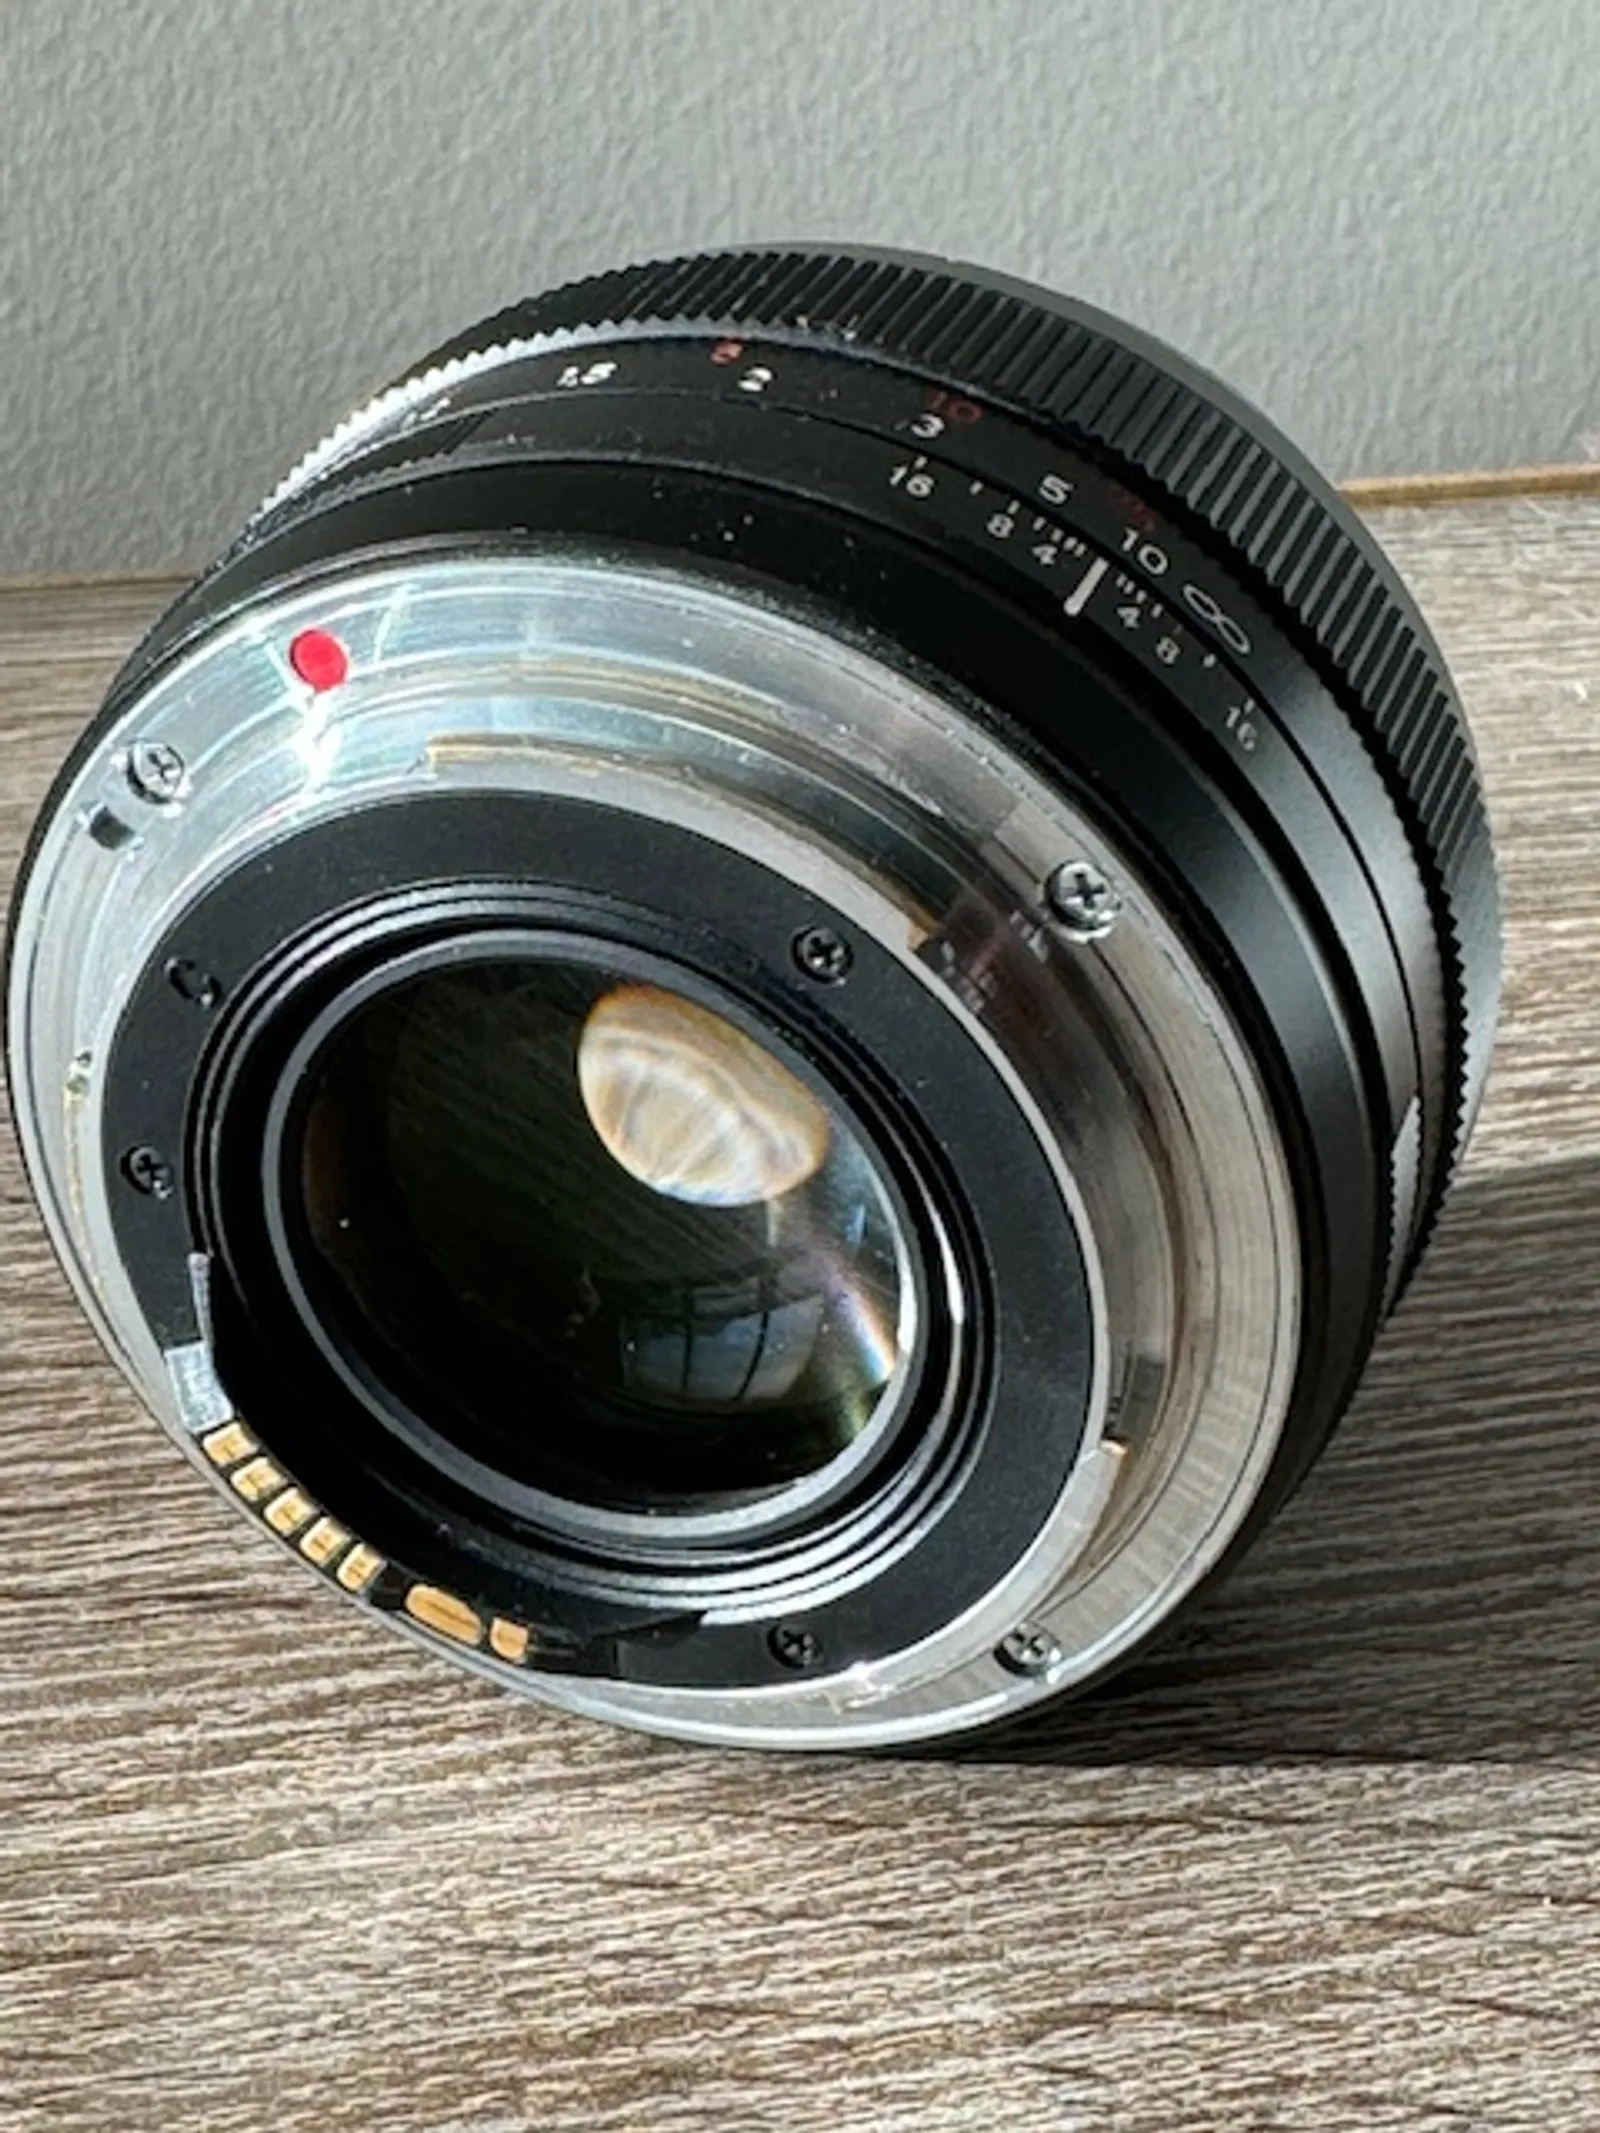 Zeiss 50mm f/1.4 Planar T* ZE Lens for Canon EF From Mark's Gear 